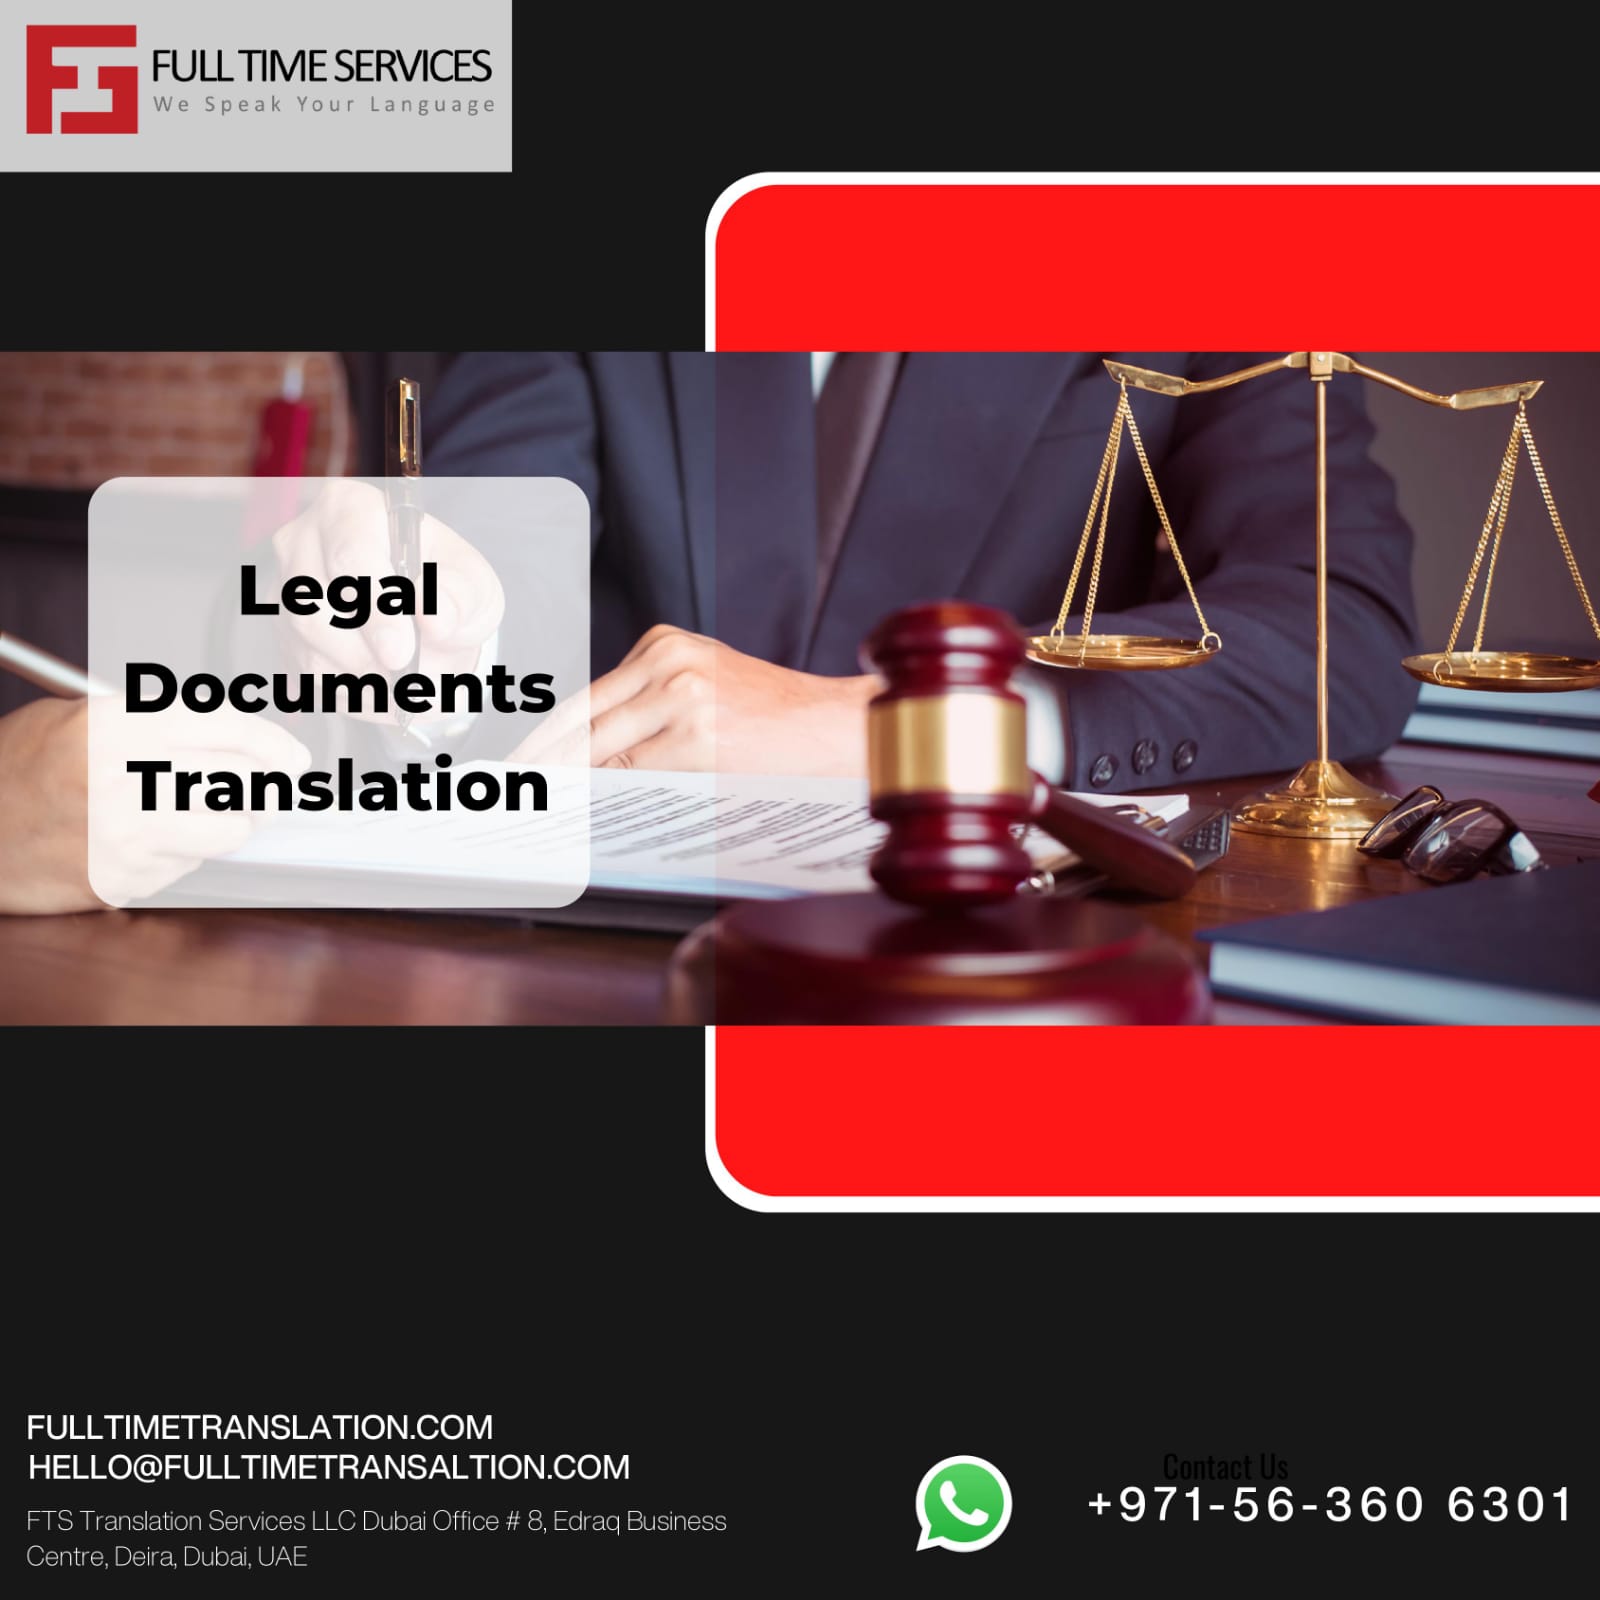 Courts Document Translation Accurate and Reliable Courts Document Translation Services. Trust our expert translators to deliver precise translations that meet legal standards. Get your legal documents translated today! Contact us for a free quote.